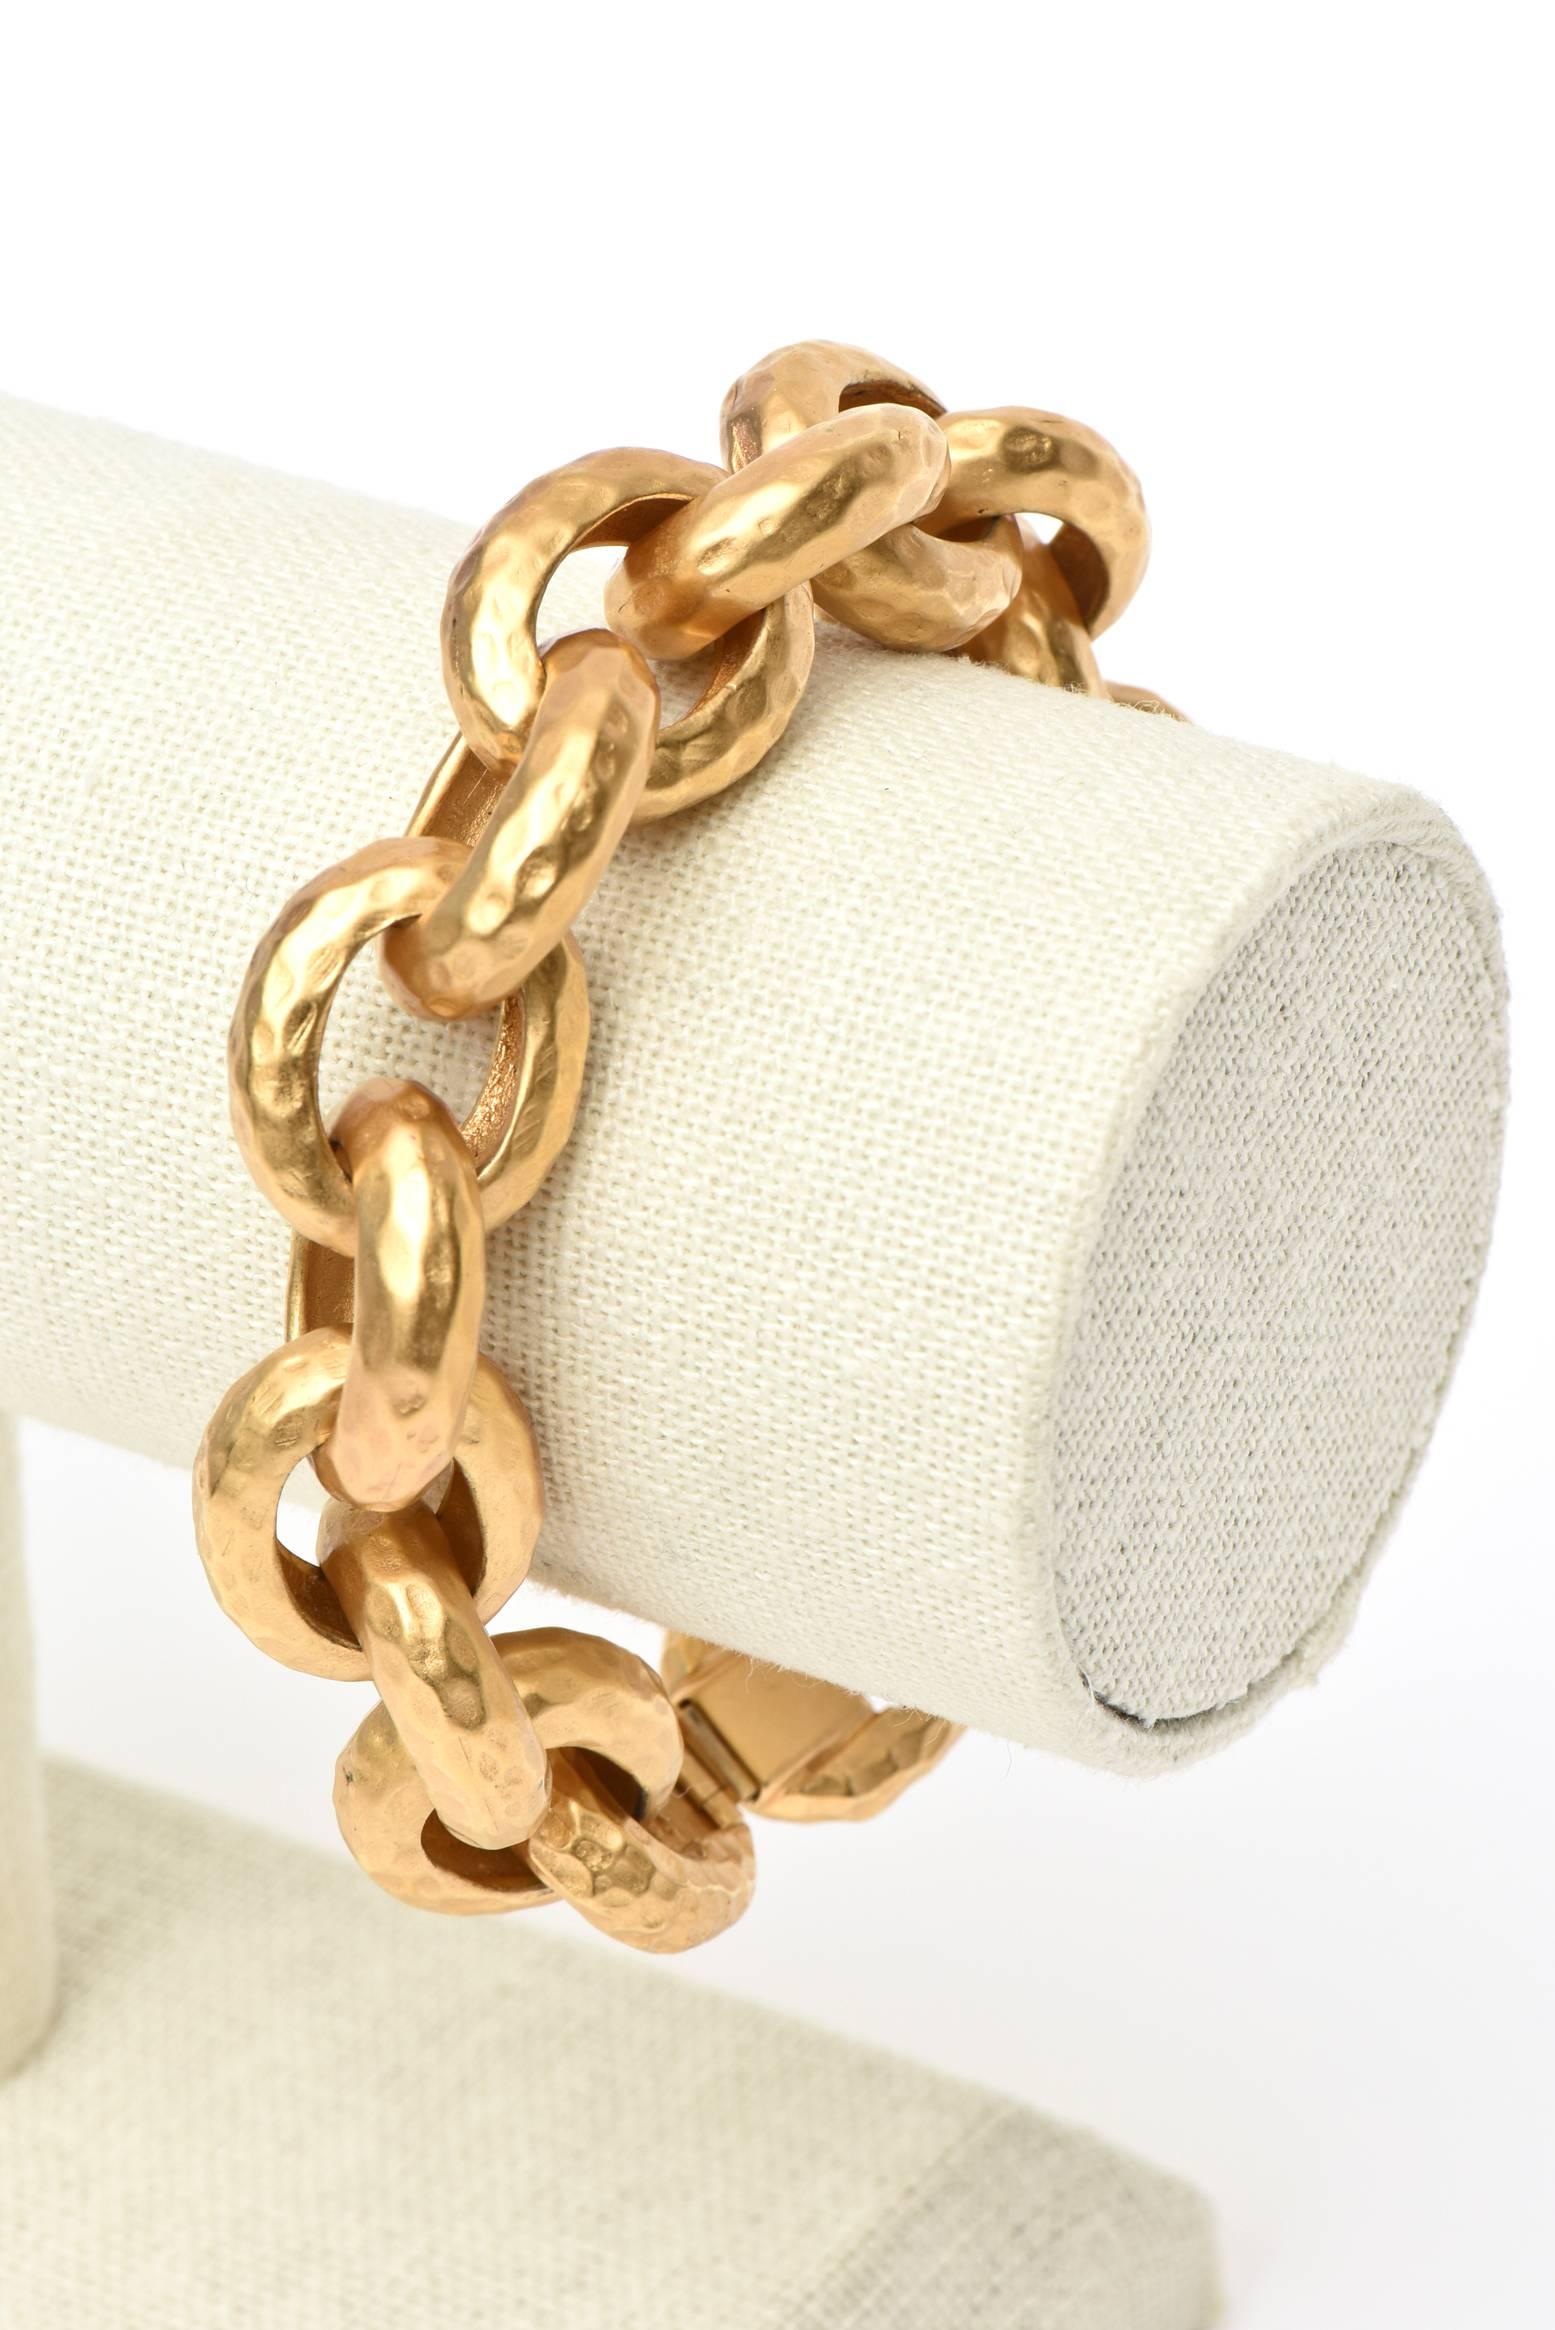 Women's Hand Hammered Gold Plated Link/Chain Bracelet